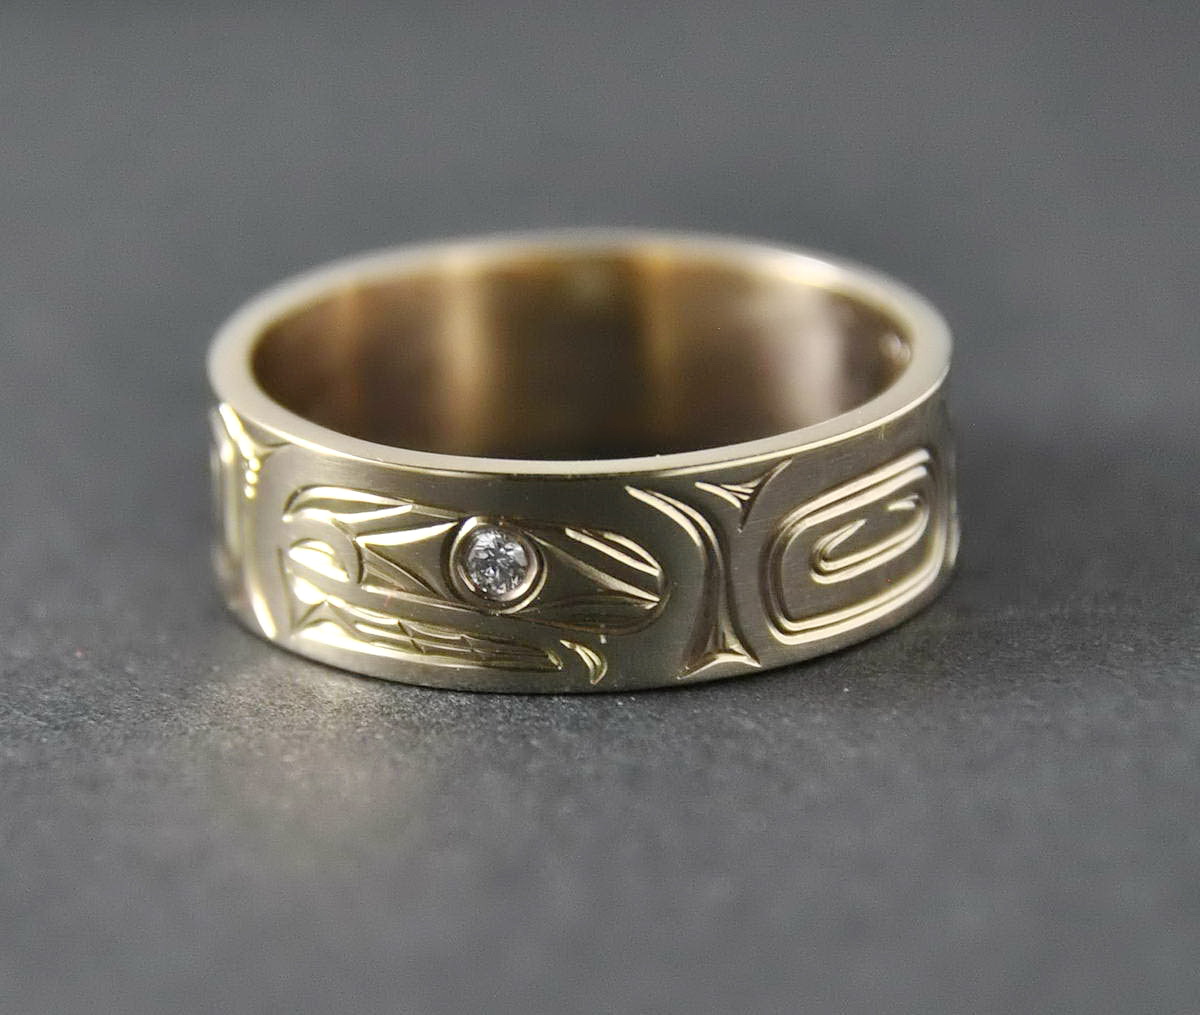 Orca (Killerwhale) Gold Ring